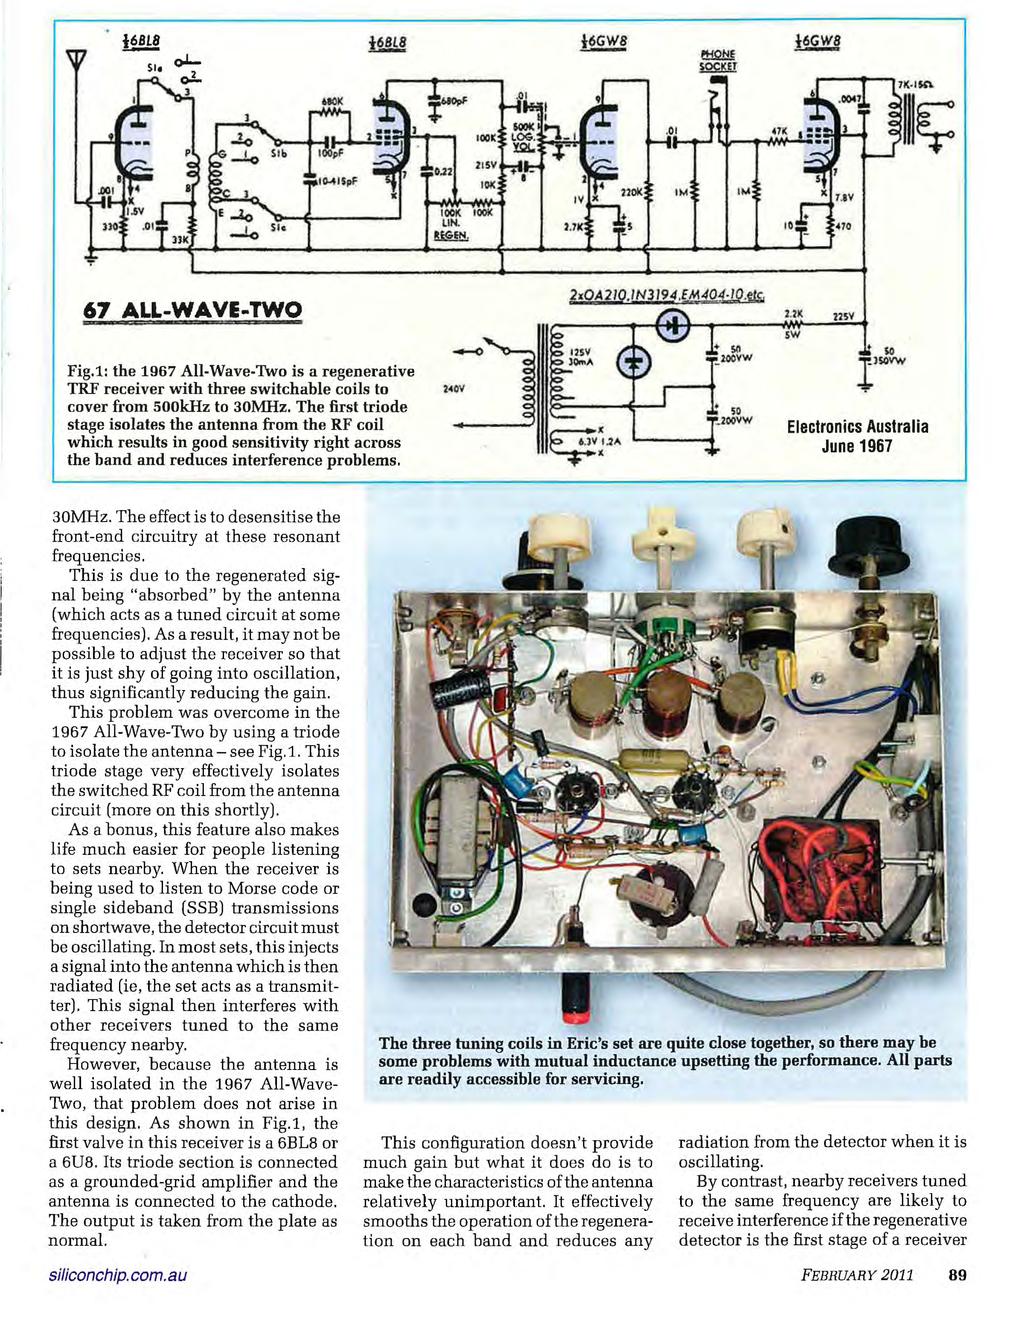 }6GWS }6G SOCKET OF r mom 4741'r.I 0047 IMF Iµ4 7 ay 470 67 ALL-WAVE-TWO Fig.1: the 1967 All-Wave-Two is a regenerative TRF receiver with three switchable coils to cover from 500kHz to 30MHz.